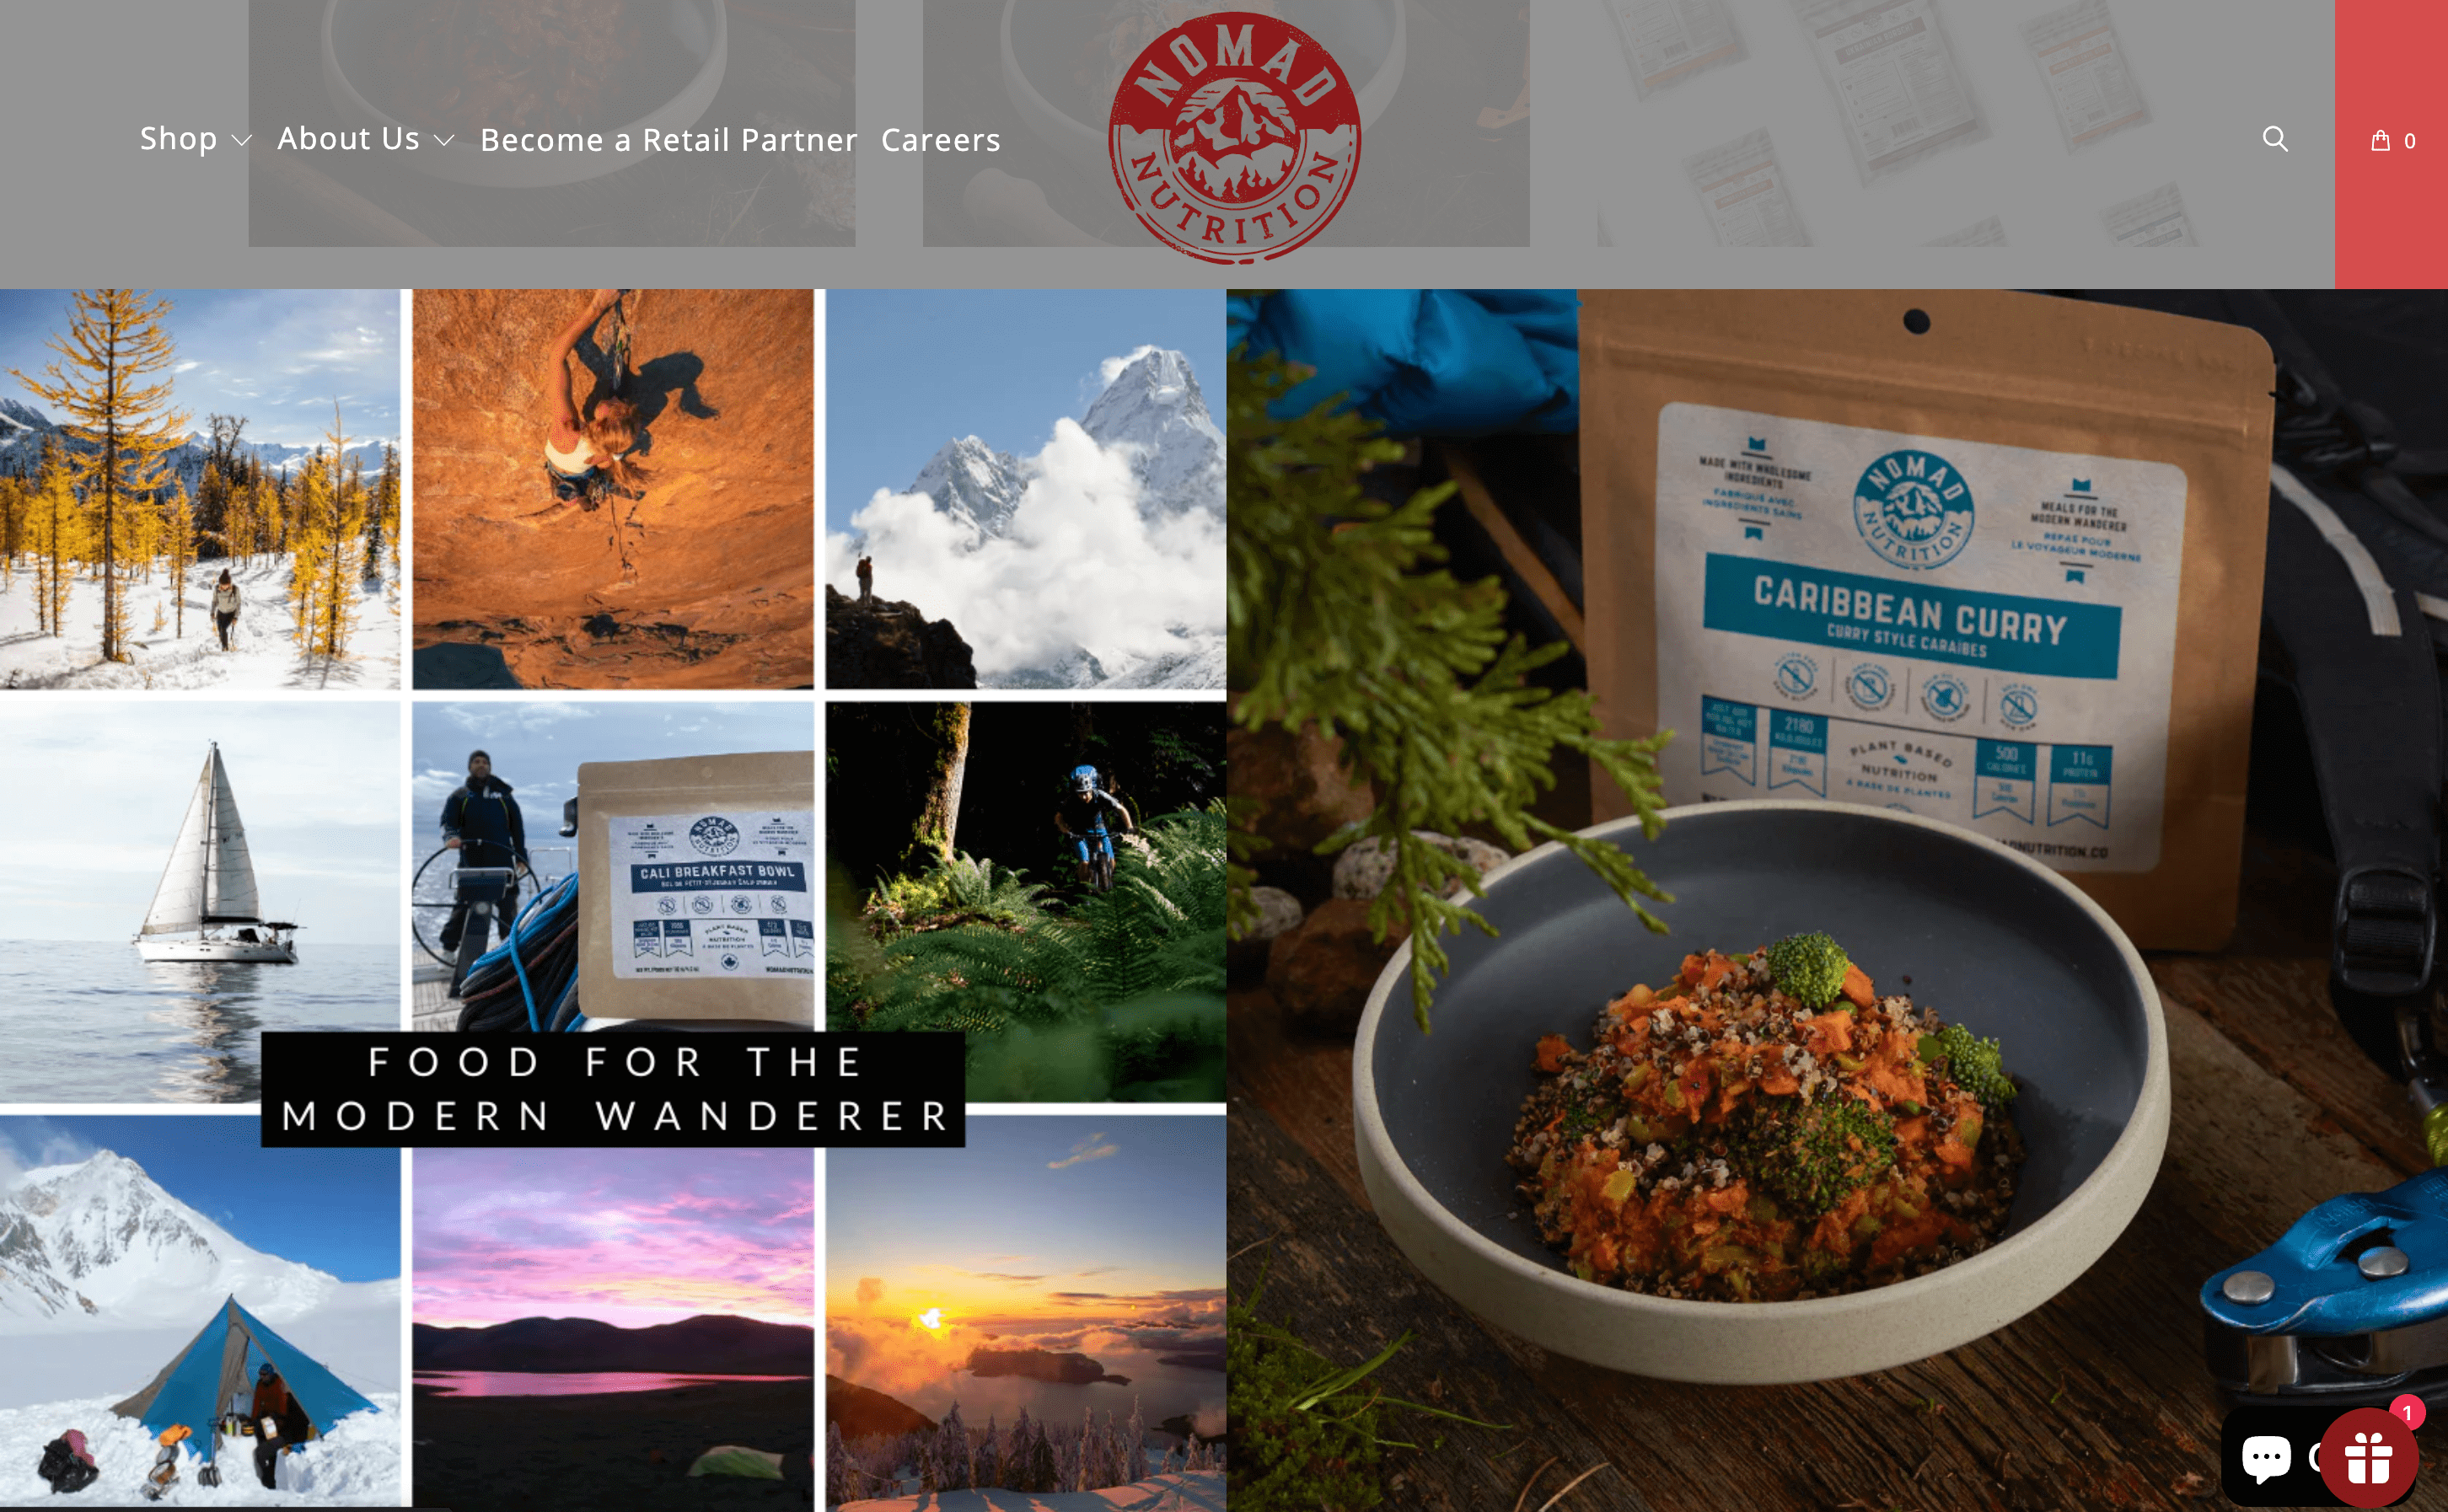 A screenshot of Nomad Nutrition’s homepage showing images of outdoor athletes performing a variety of sports next to an image of its dehydrated plant-based Caribbean Curry.